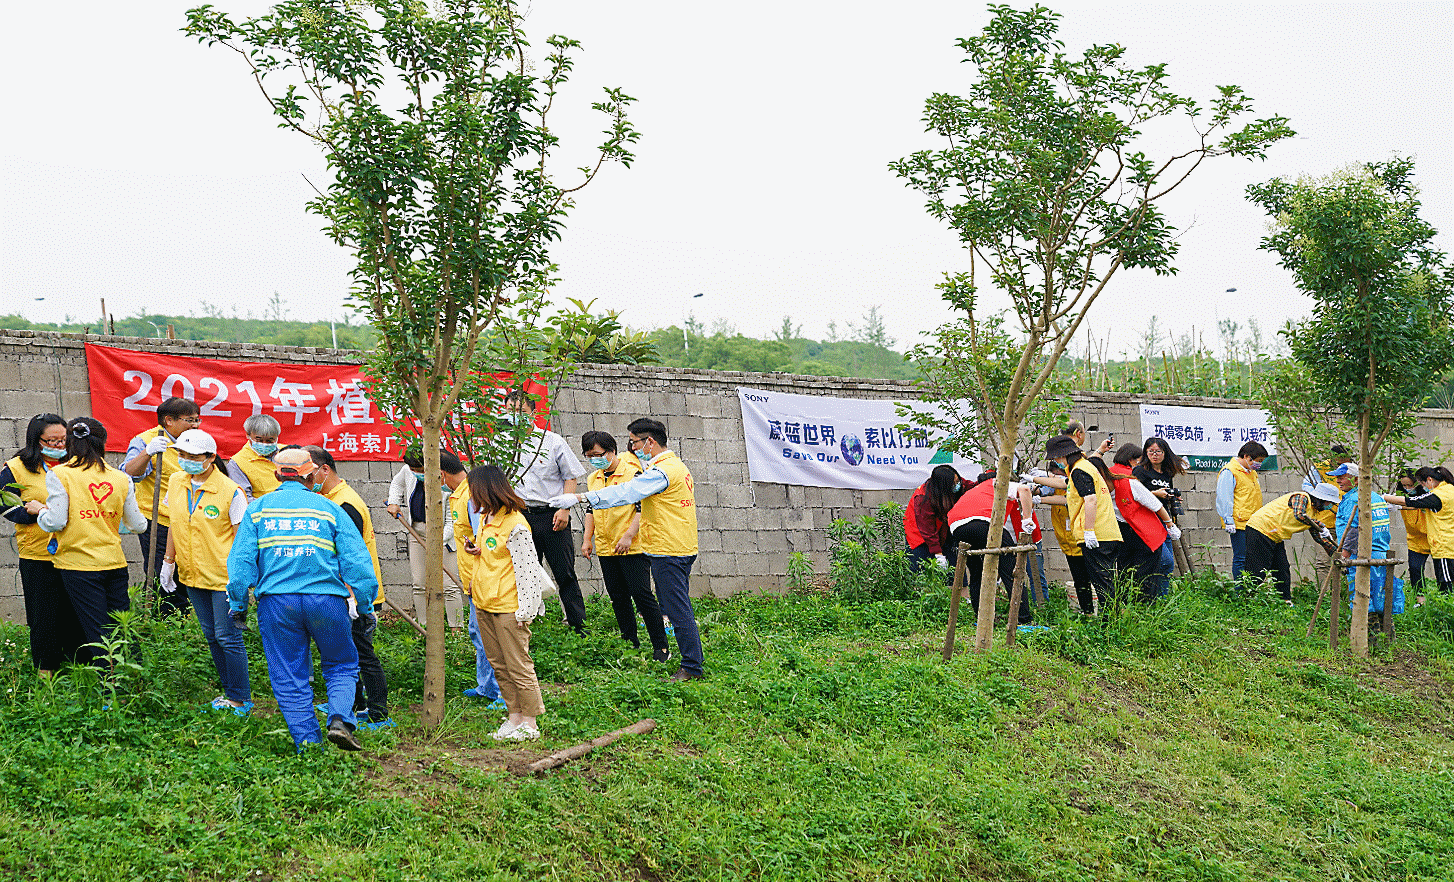 Photograph showing employees of Shanghai site, China participating in cooperative farming activity